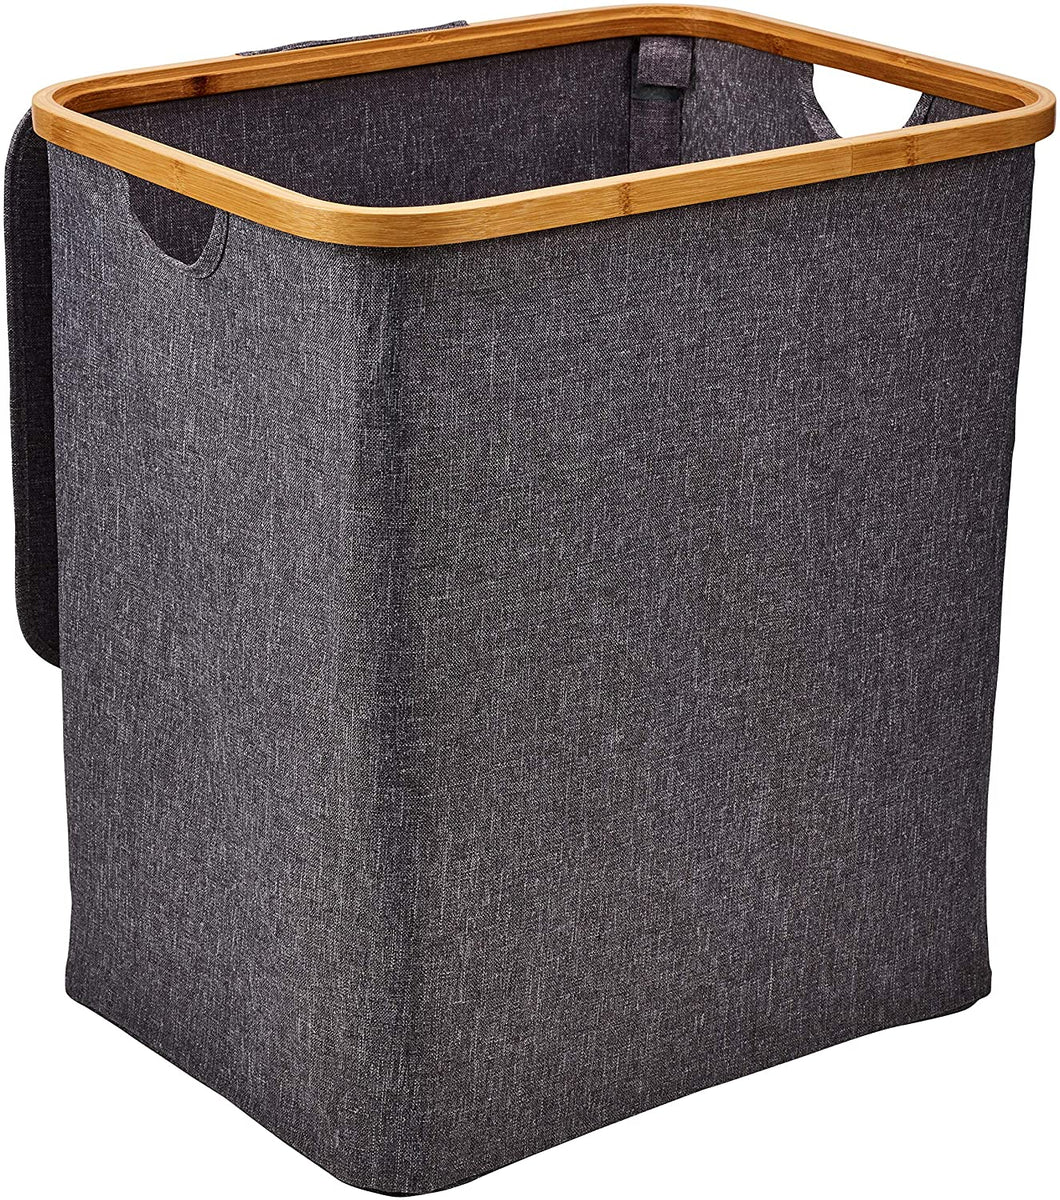 Zuvo Collapsible Multipurpose Laundry Basket | Bamboo Wood and Linen Made Laundry Basket